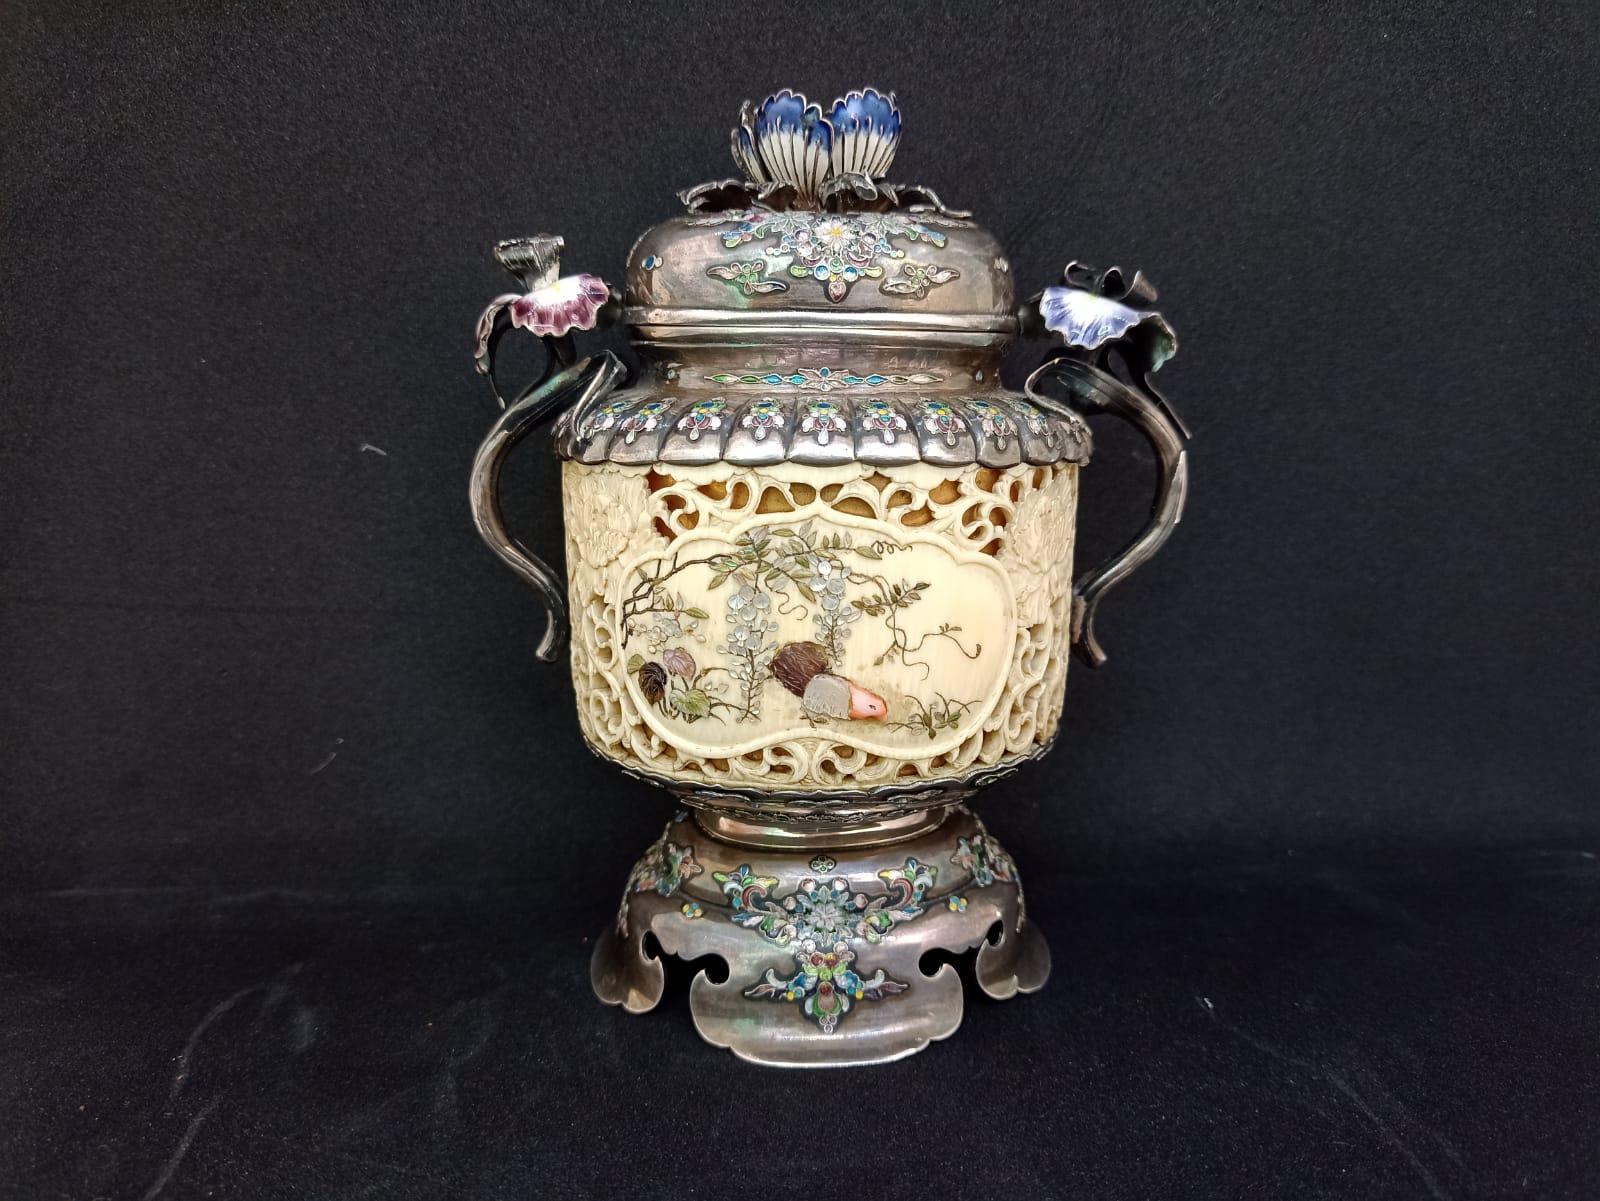 Shibayama koro Japan Solid silver and enamel
Materials solid silver and enamel with applications
incense burner
Decorated with flowers and pajarons
Circa 19th century Origin Japan
Meji 1890-1912
Very good condition with some minor wear
Signed